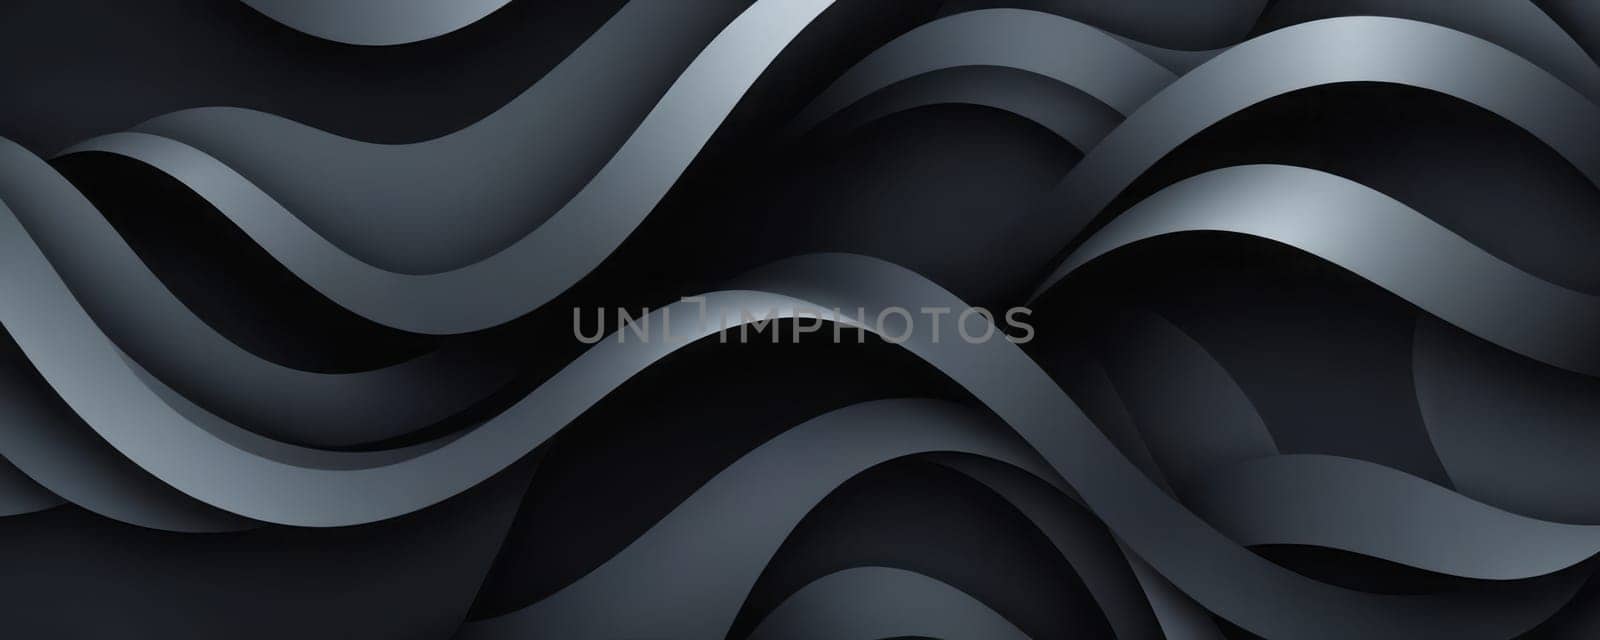 Looped Shapes in Black and Dark gray by nkotlyar